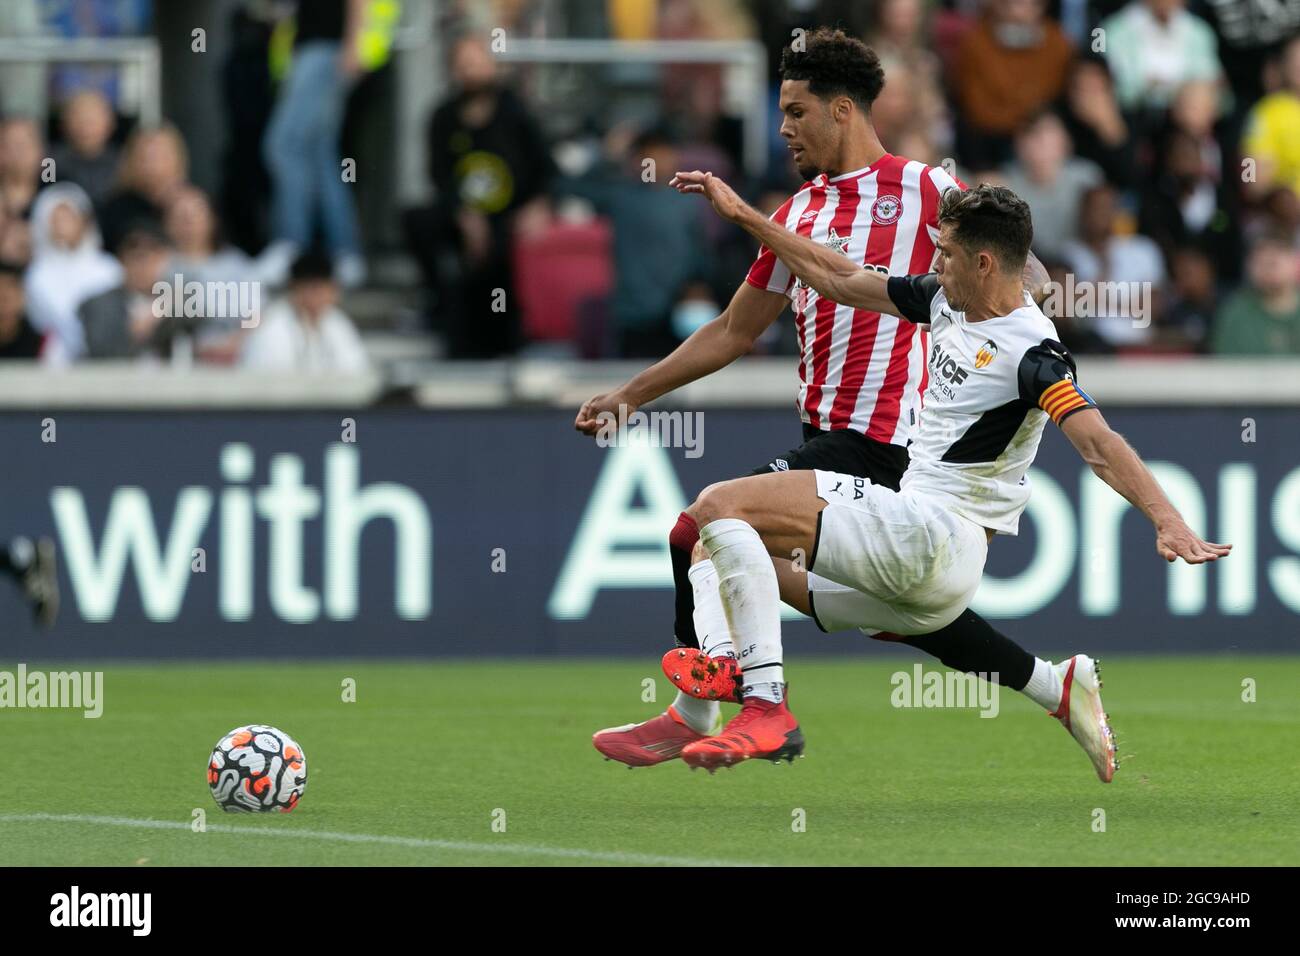 LONDON, UK. AUG 7TH: Myles Peart-Harris of Brentford and Gabriel Paulista of Valencia compete for the ball during the Pre-season Friendly match between Brentford and Valencia CF at the Brentford Community Stadium, Brentford on Saturday 7th August 2021. (Credit: Juan Gasparini | MI News) Credit: MI News & Sport /Alamy Live News Stock Photo